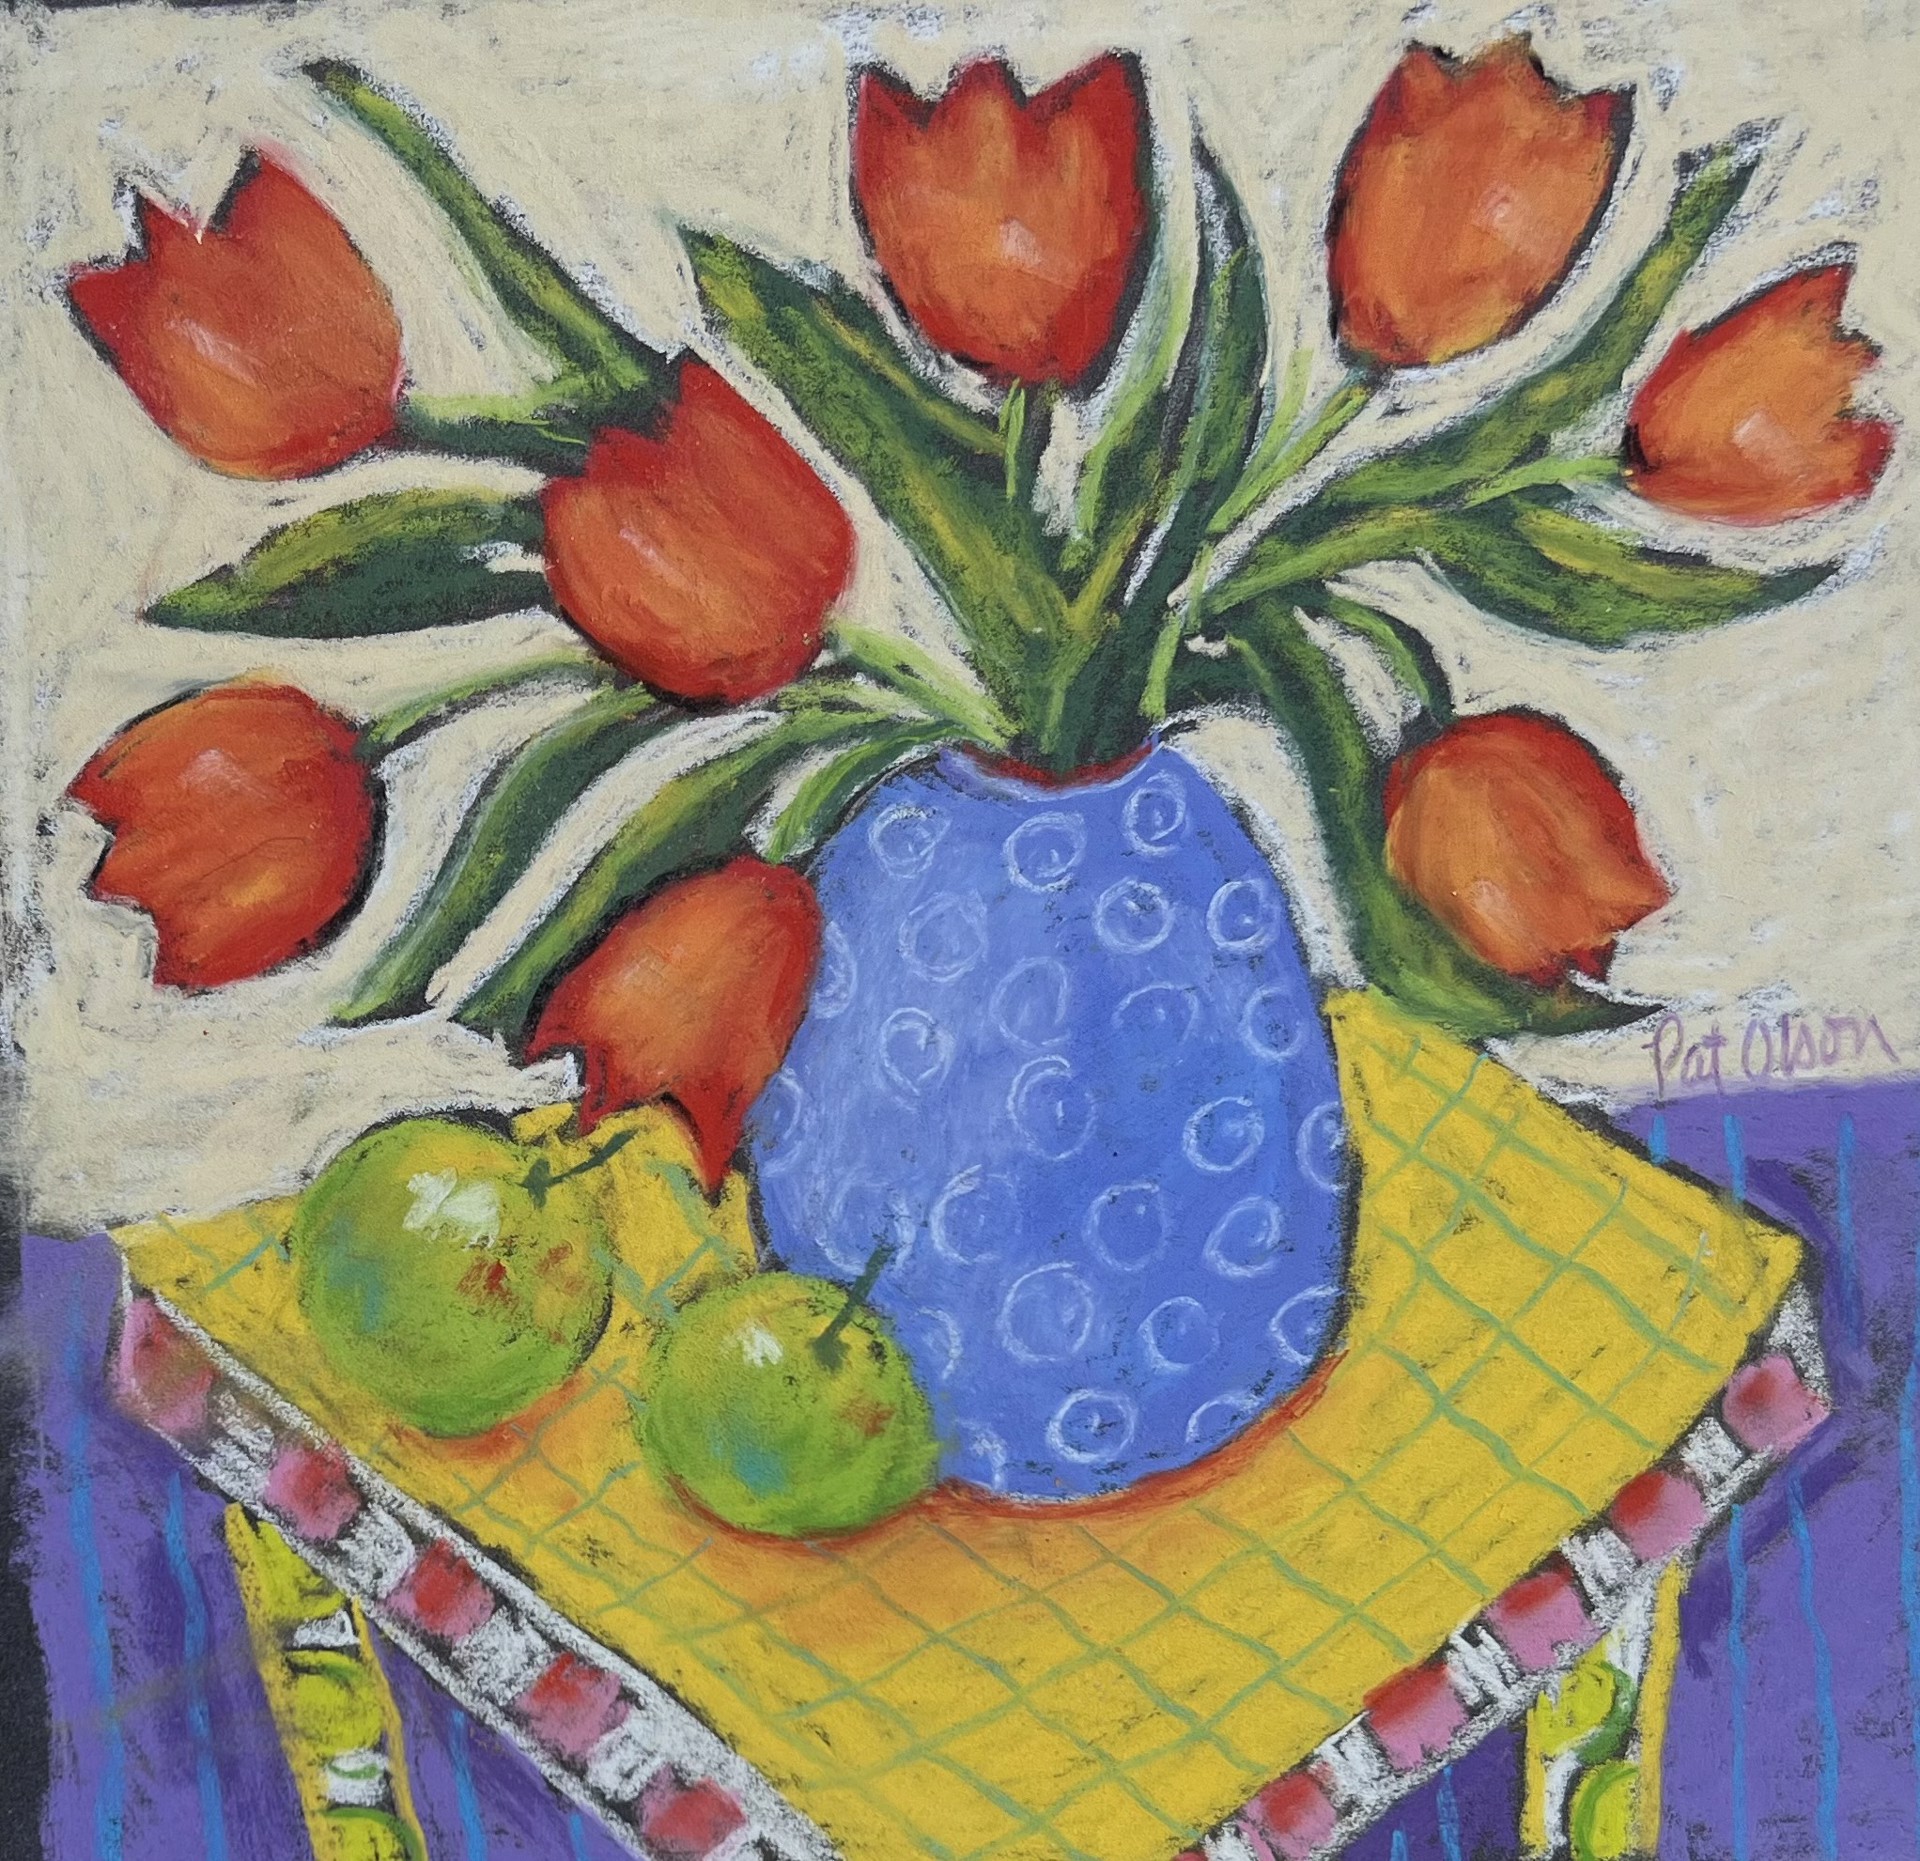 Tulips with Two Green Apples by Pat Olson